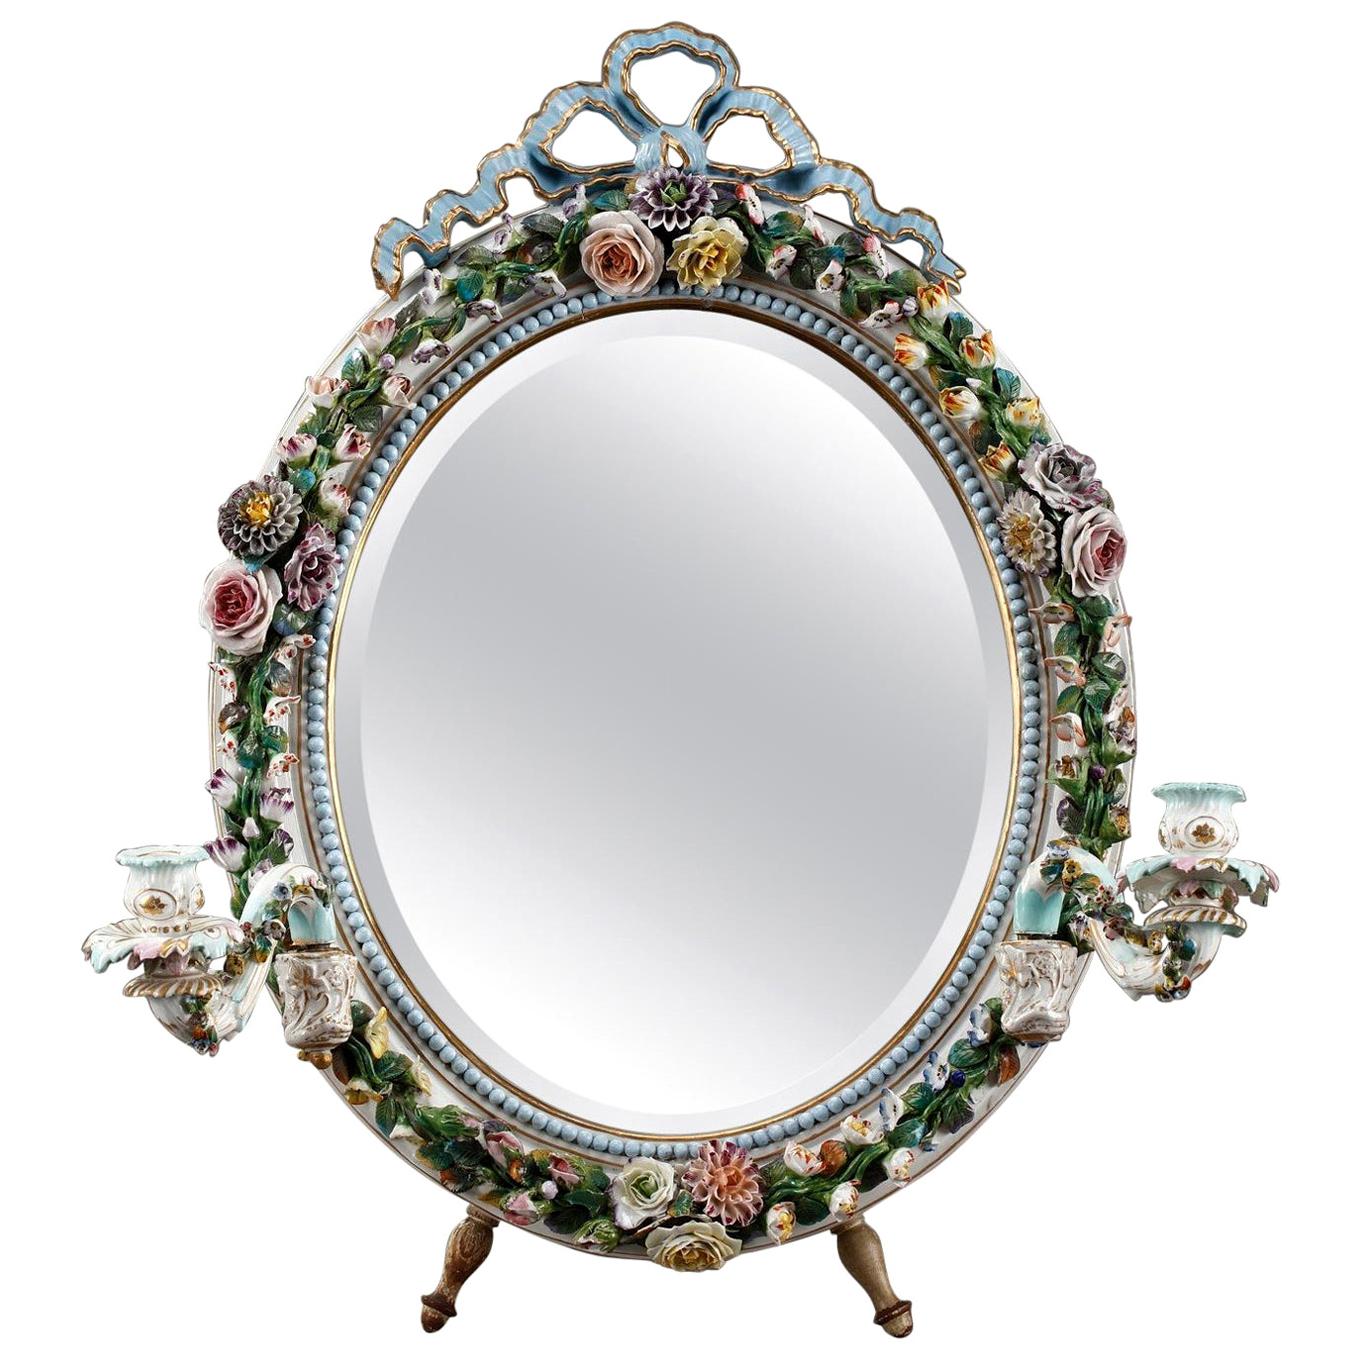 Porcelain Mirror with Barbotine Floral Decoration in Meissen Style